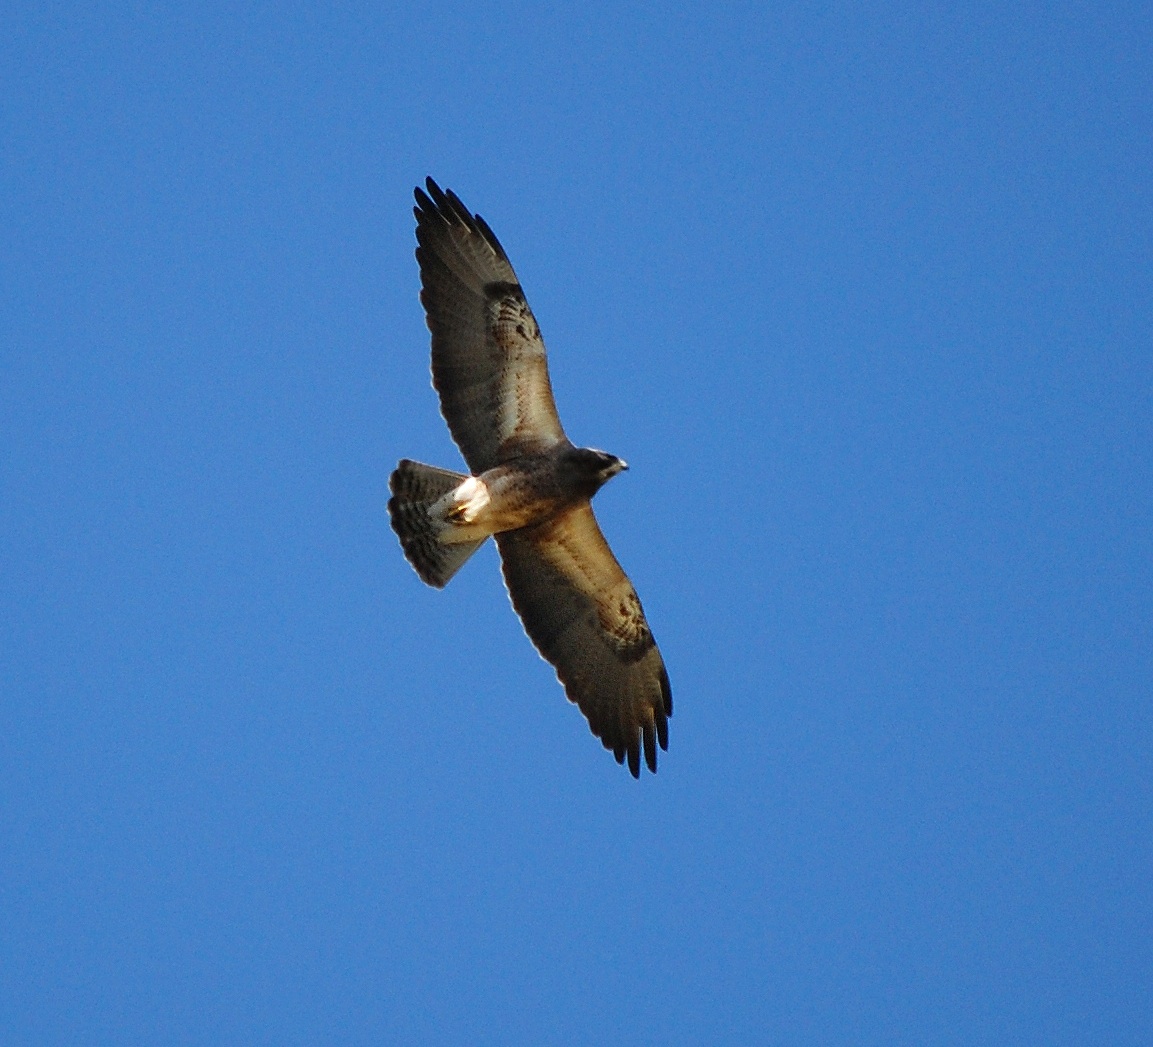 view looking up at a Swainson's hawk in flight and its wings full spread against a blue sky